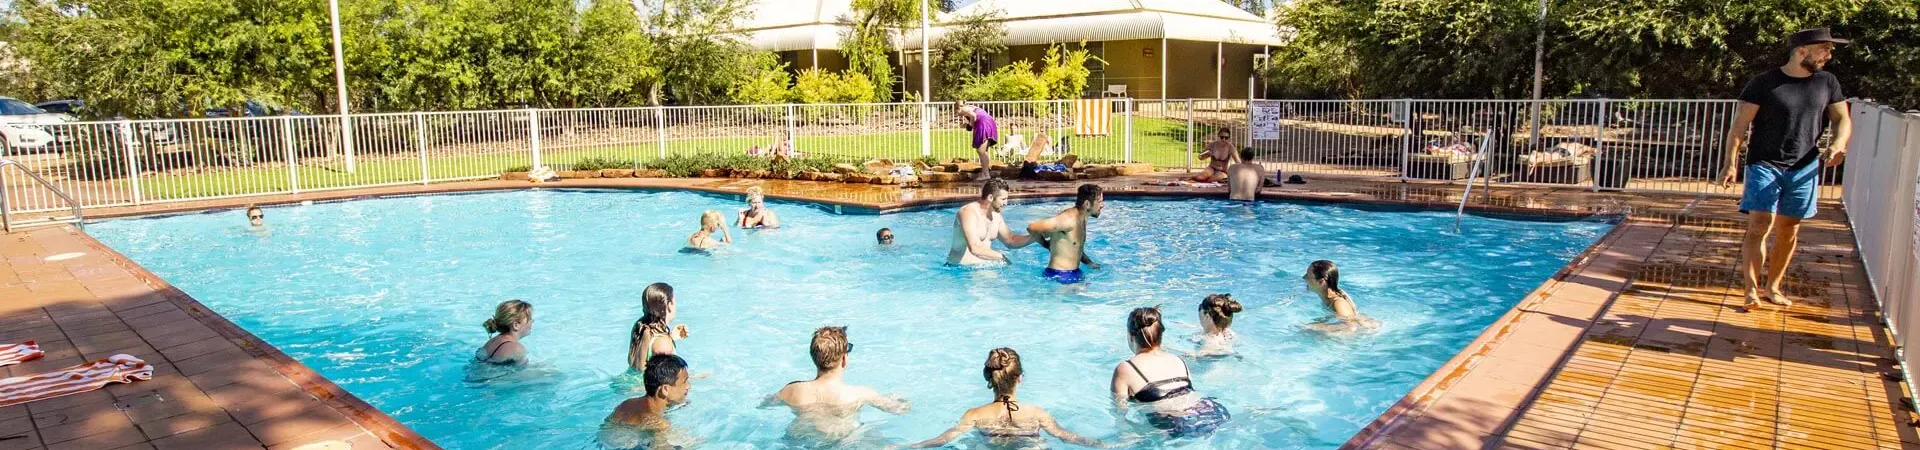 A group of people in a swimming pool in Australia